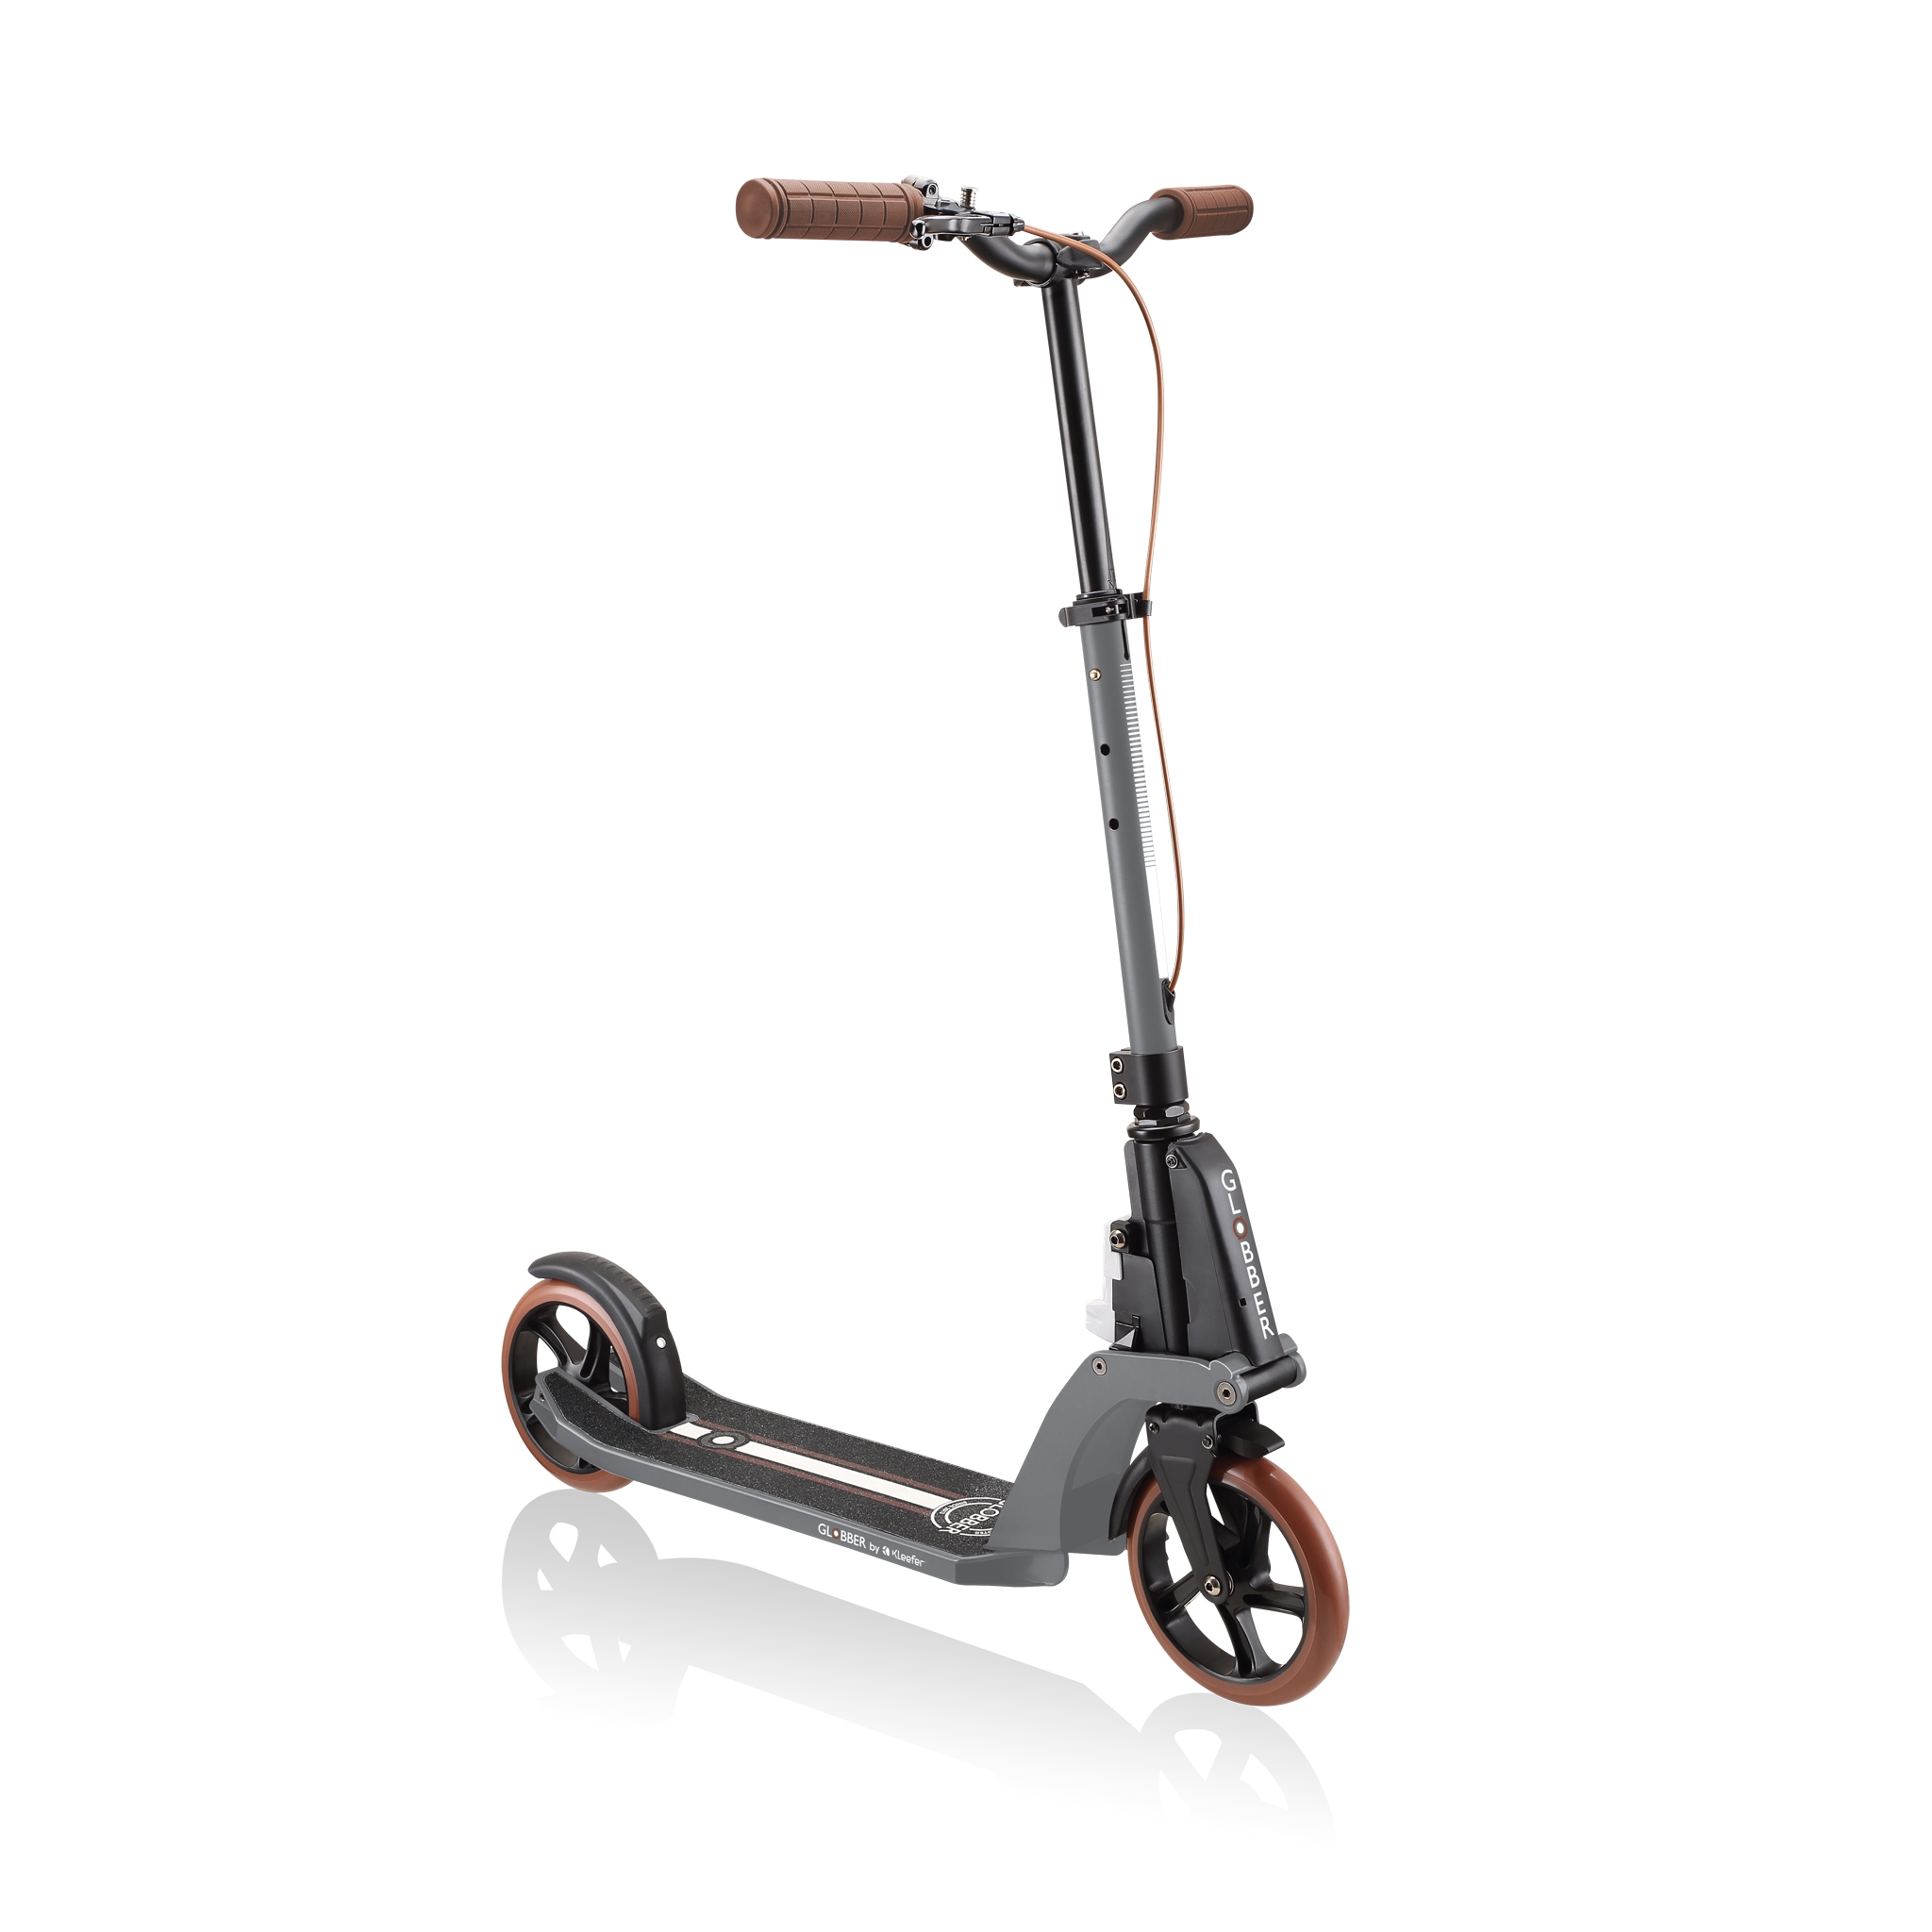 ONE-K-180-PISTON-DELUXE-best-folding-scooter-for-adults 0